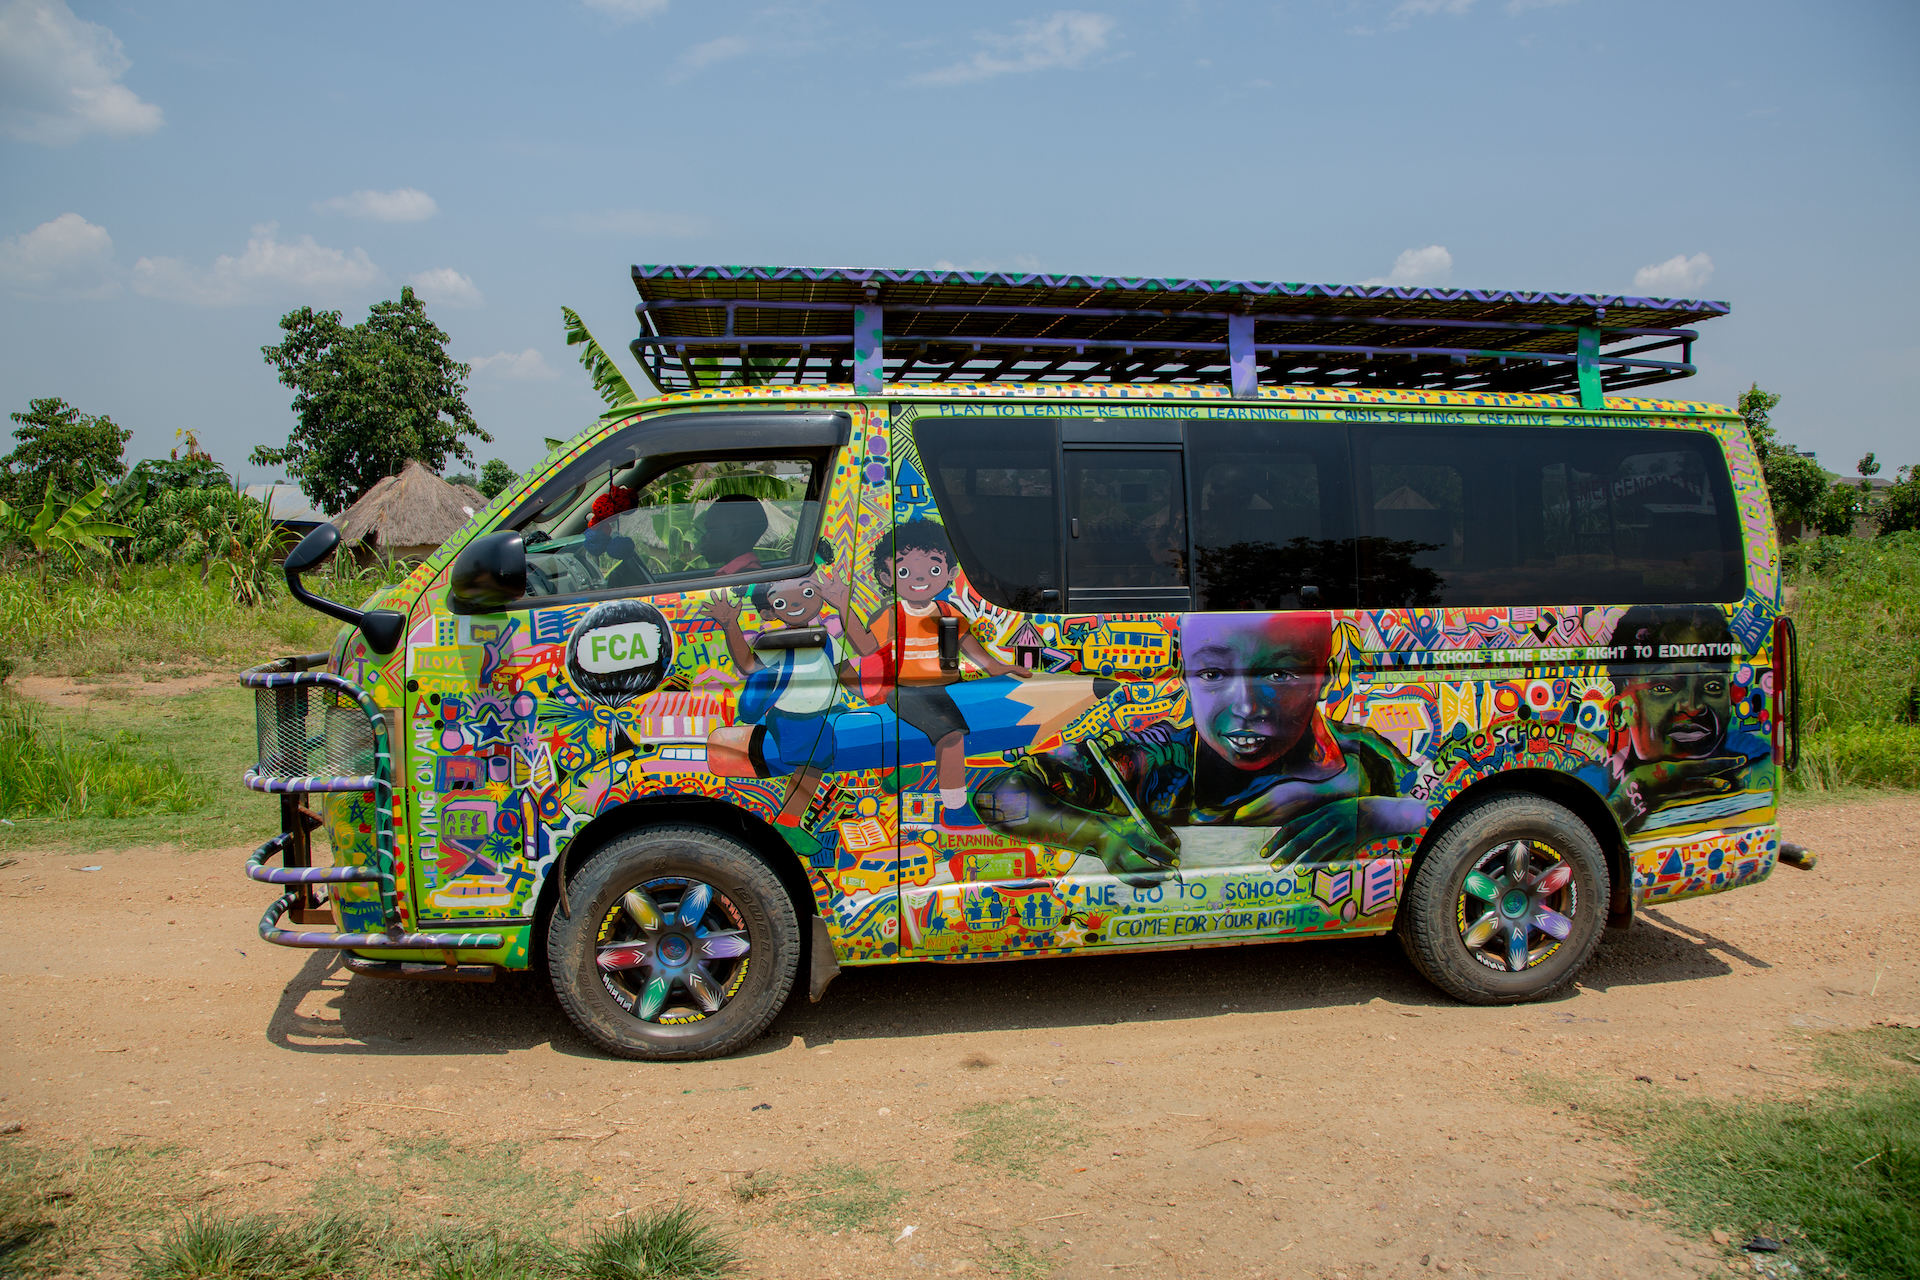 A brightly coloured minibus with numerous illustrations of children, positive slogans and the FCA logo stands on a dirt road.